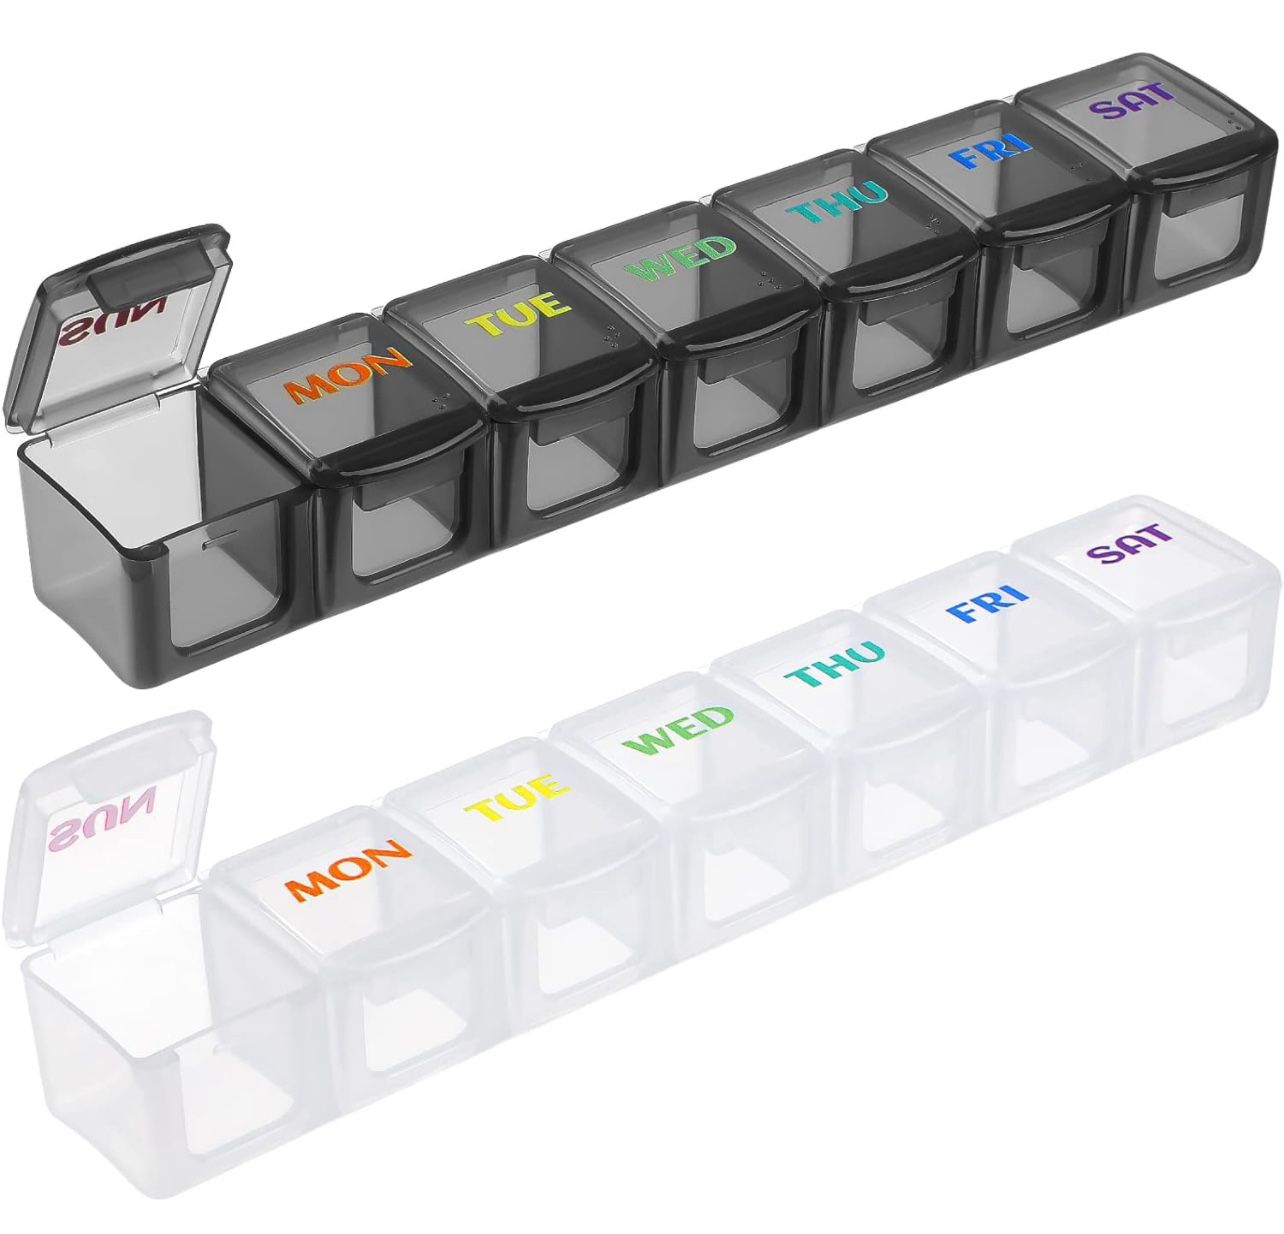 Weekly Travel Pill Organizer Box 7 Days Large Compartments 